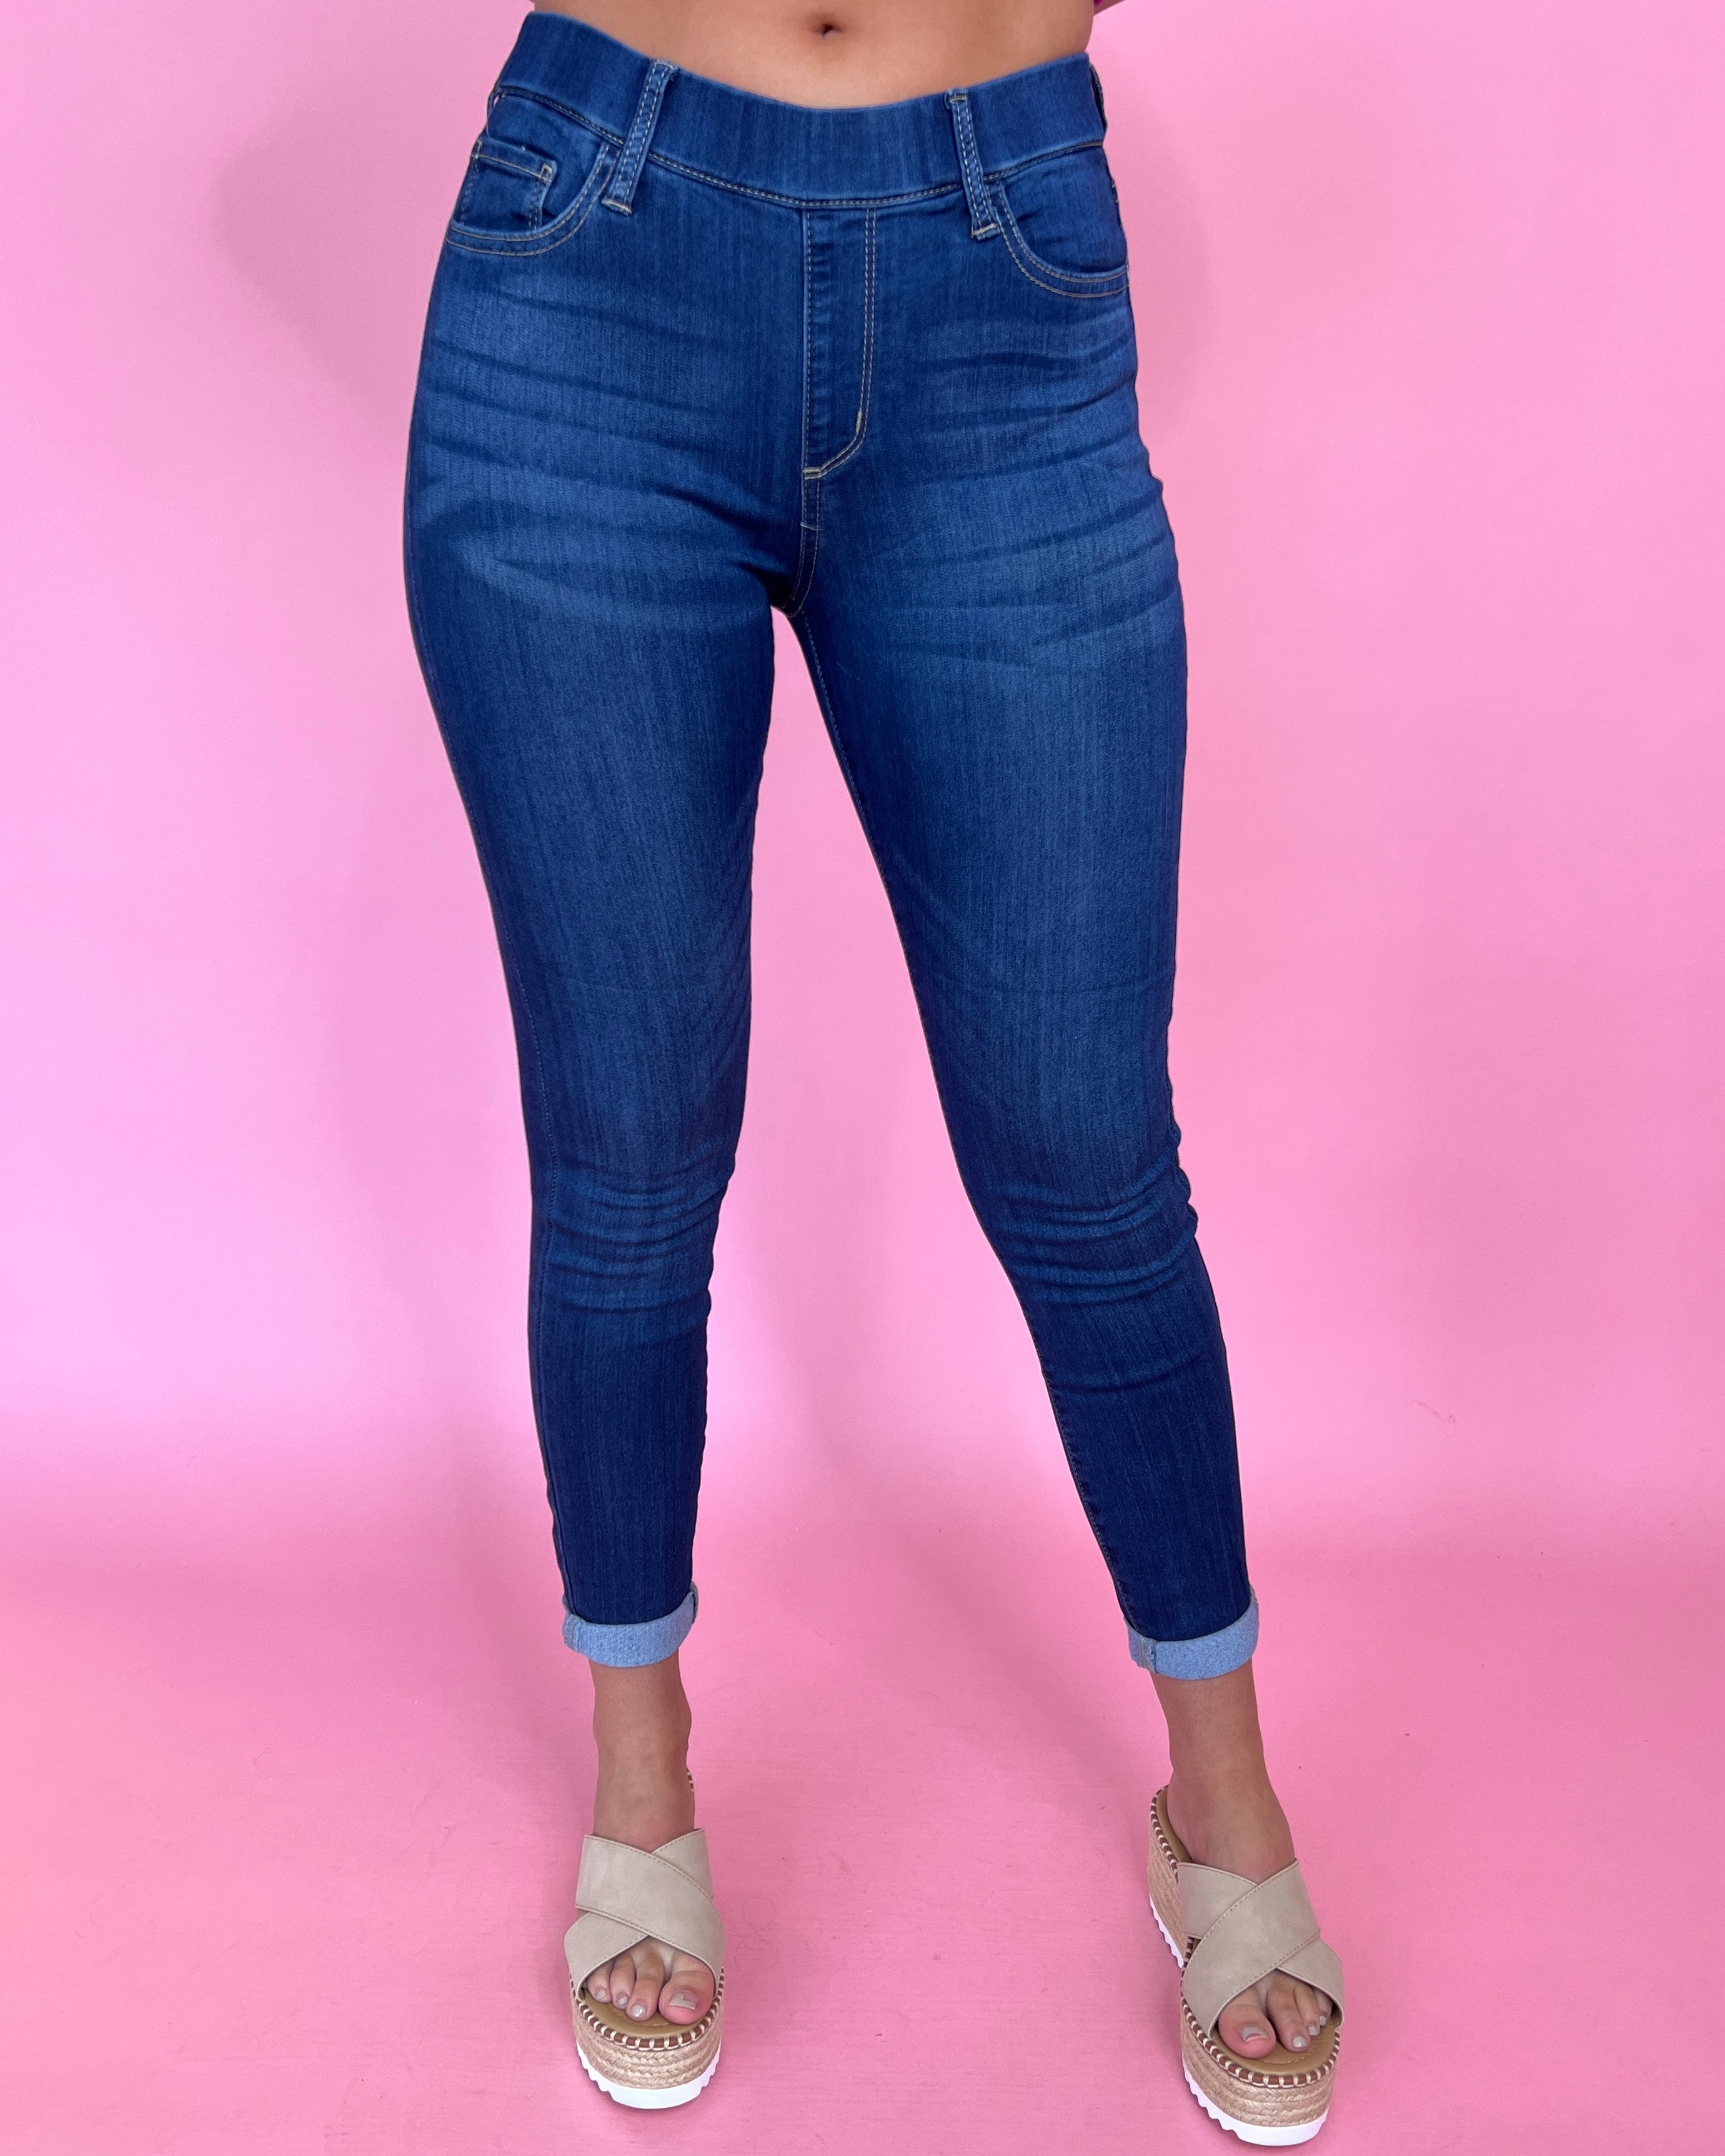 Casual Feelings Dark Denim Pull On Skinny Jeans-Shop-Womens-Boutique-Clothing